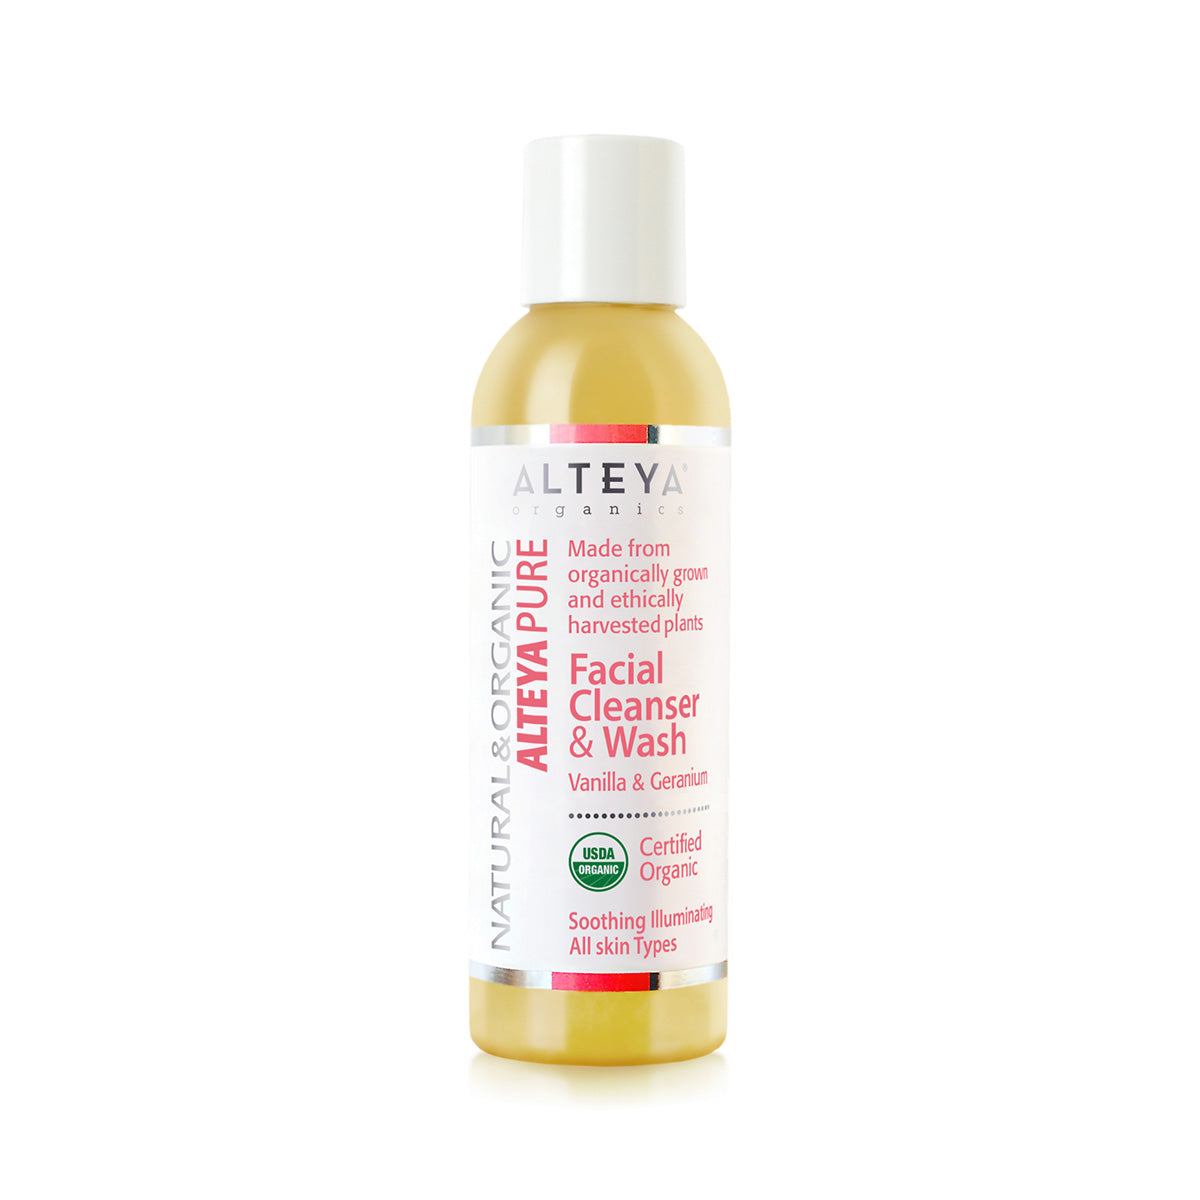 A gentle and organic Facial Cleanser & Wash - Vanilla & Geranium by Alteya Organics, infused with the soothing scent of vanilla and geranium.